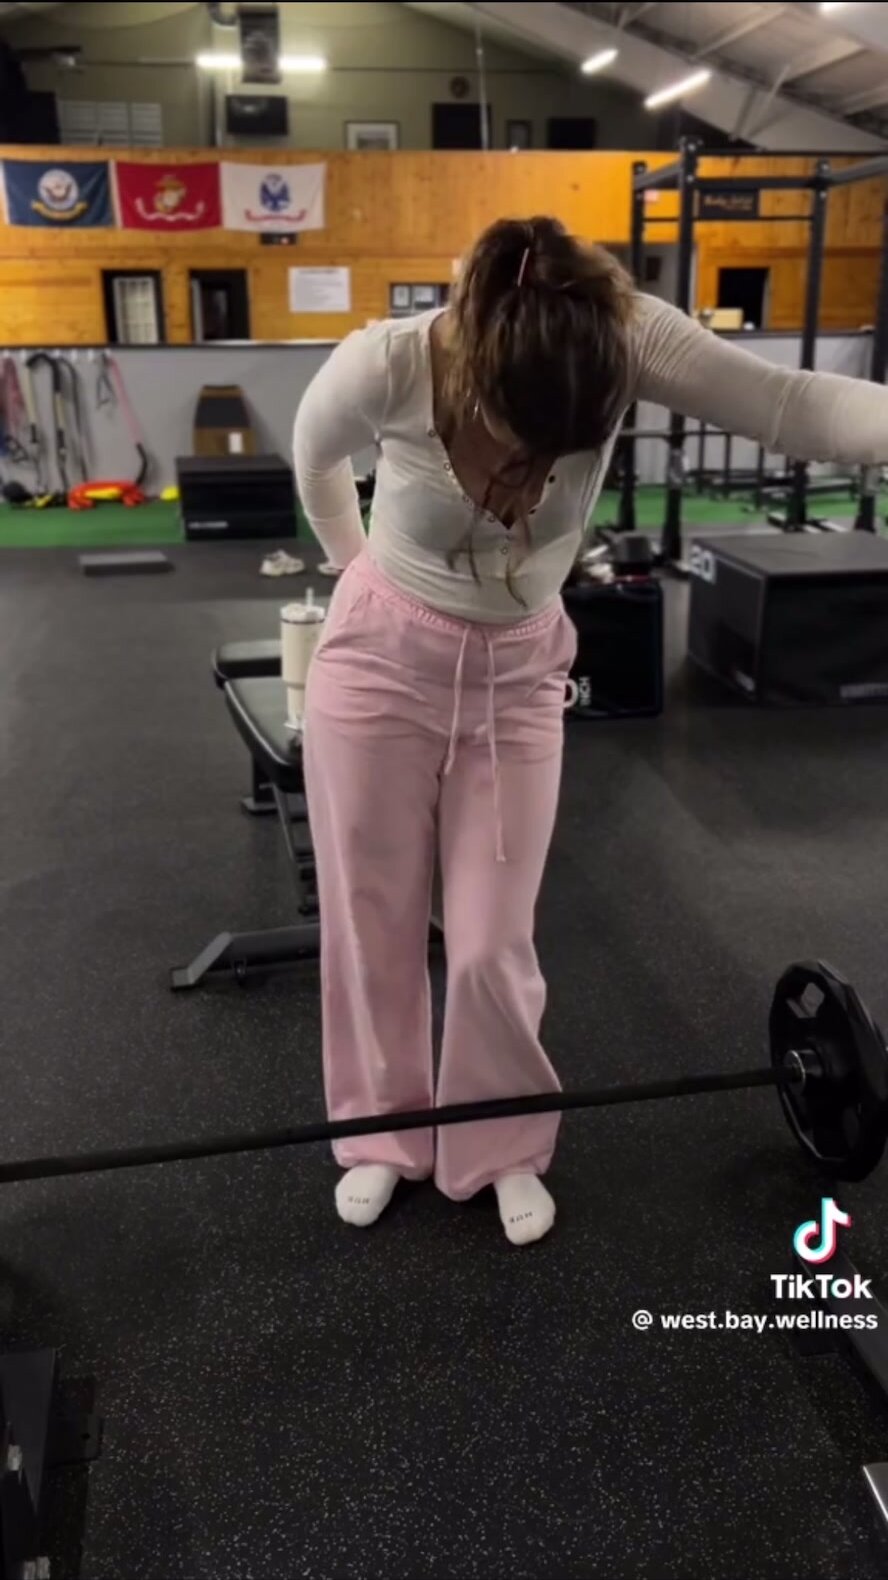 Girl almost shits herself in gym